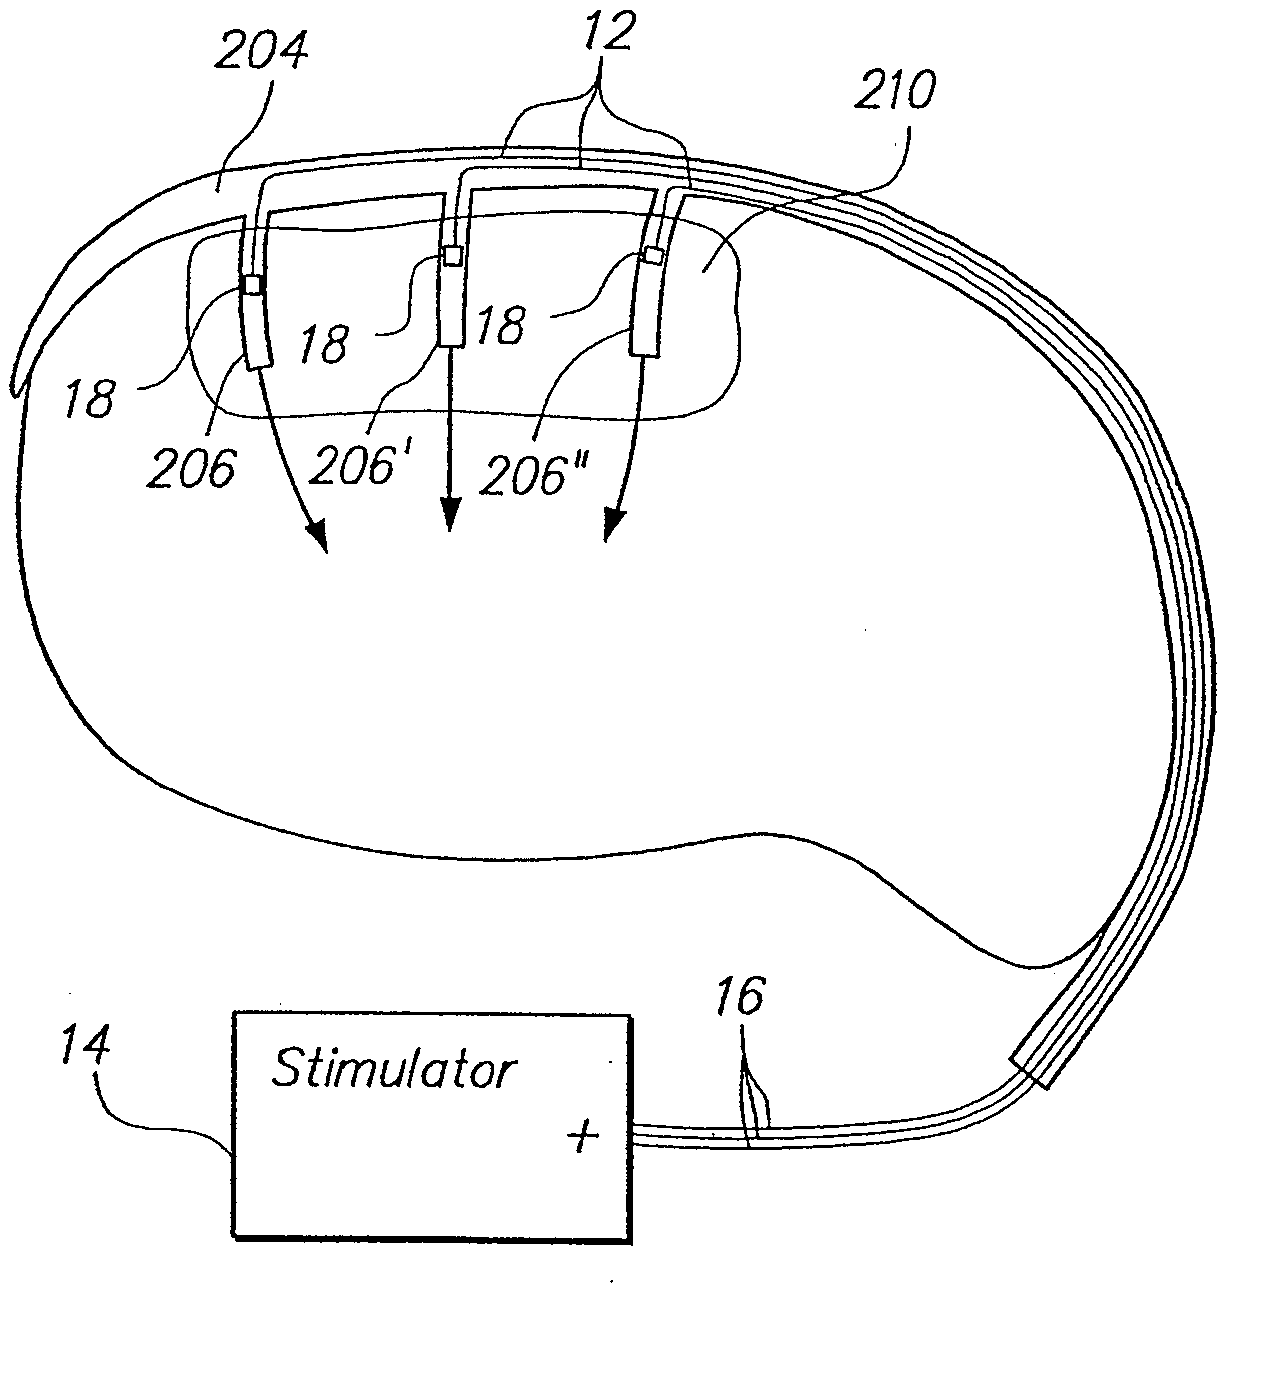 Method of intravascularly delivering stimulation leads into brain to stimulate the spg